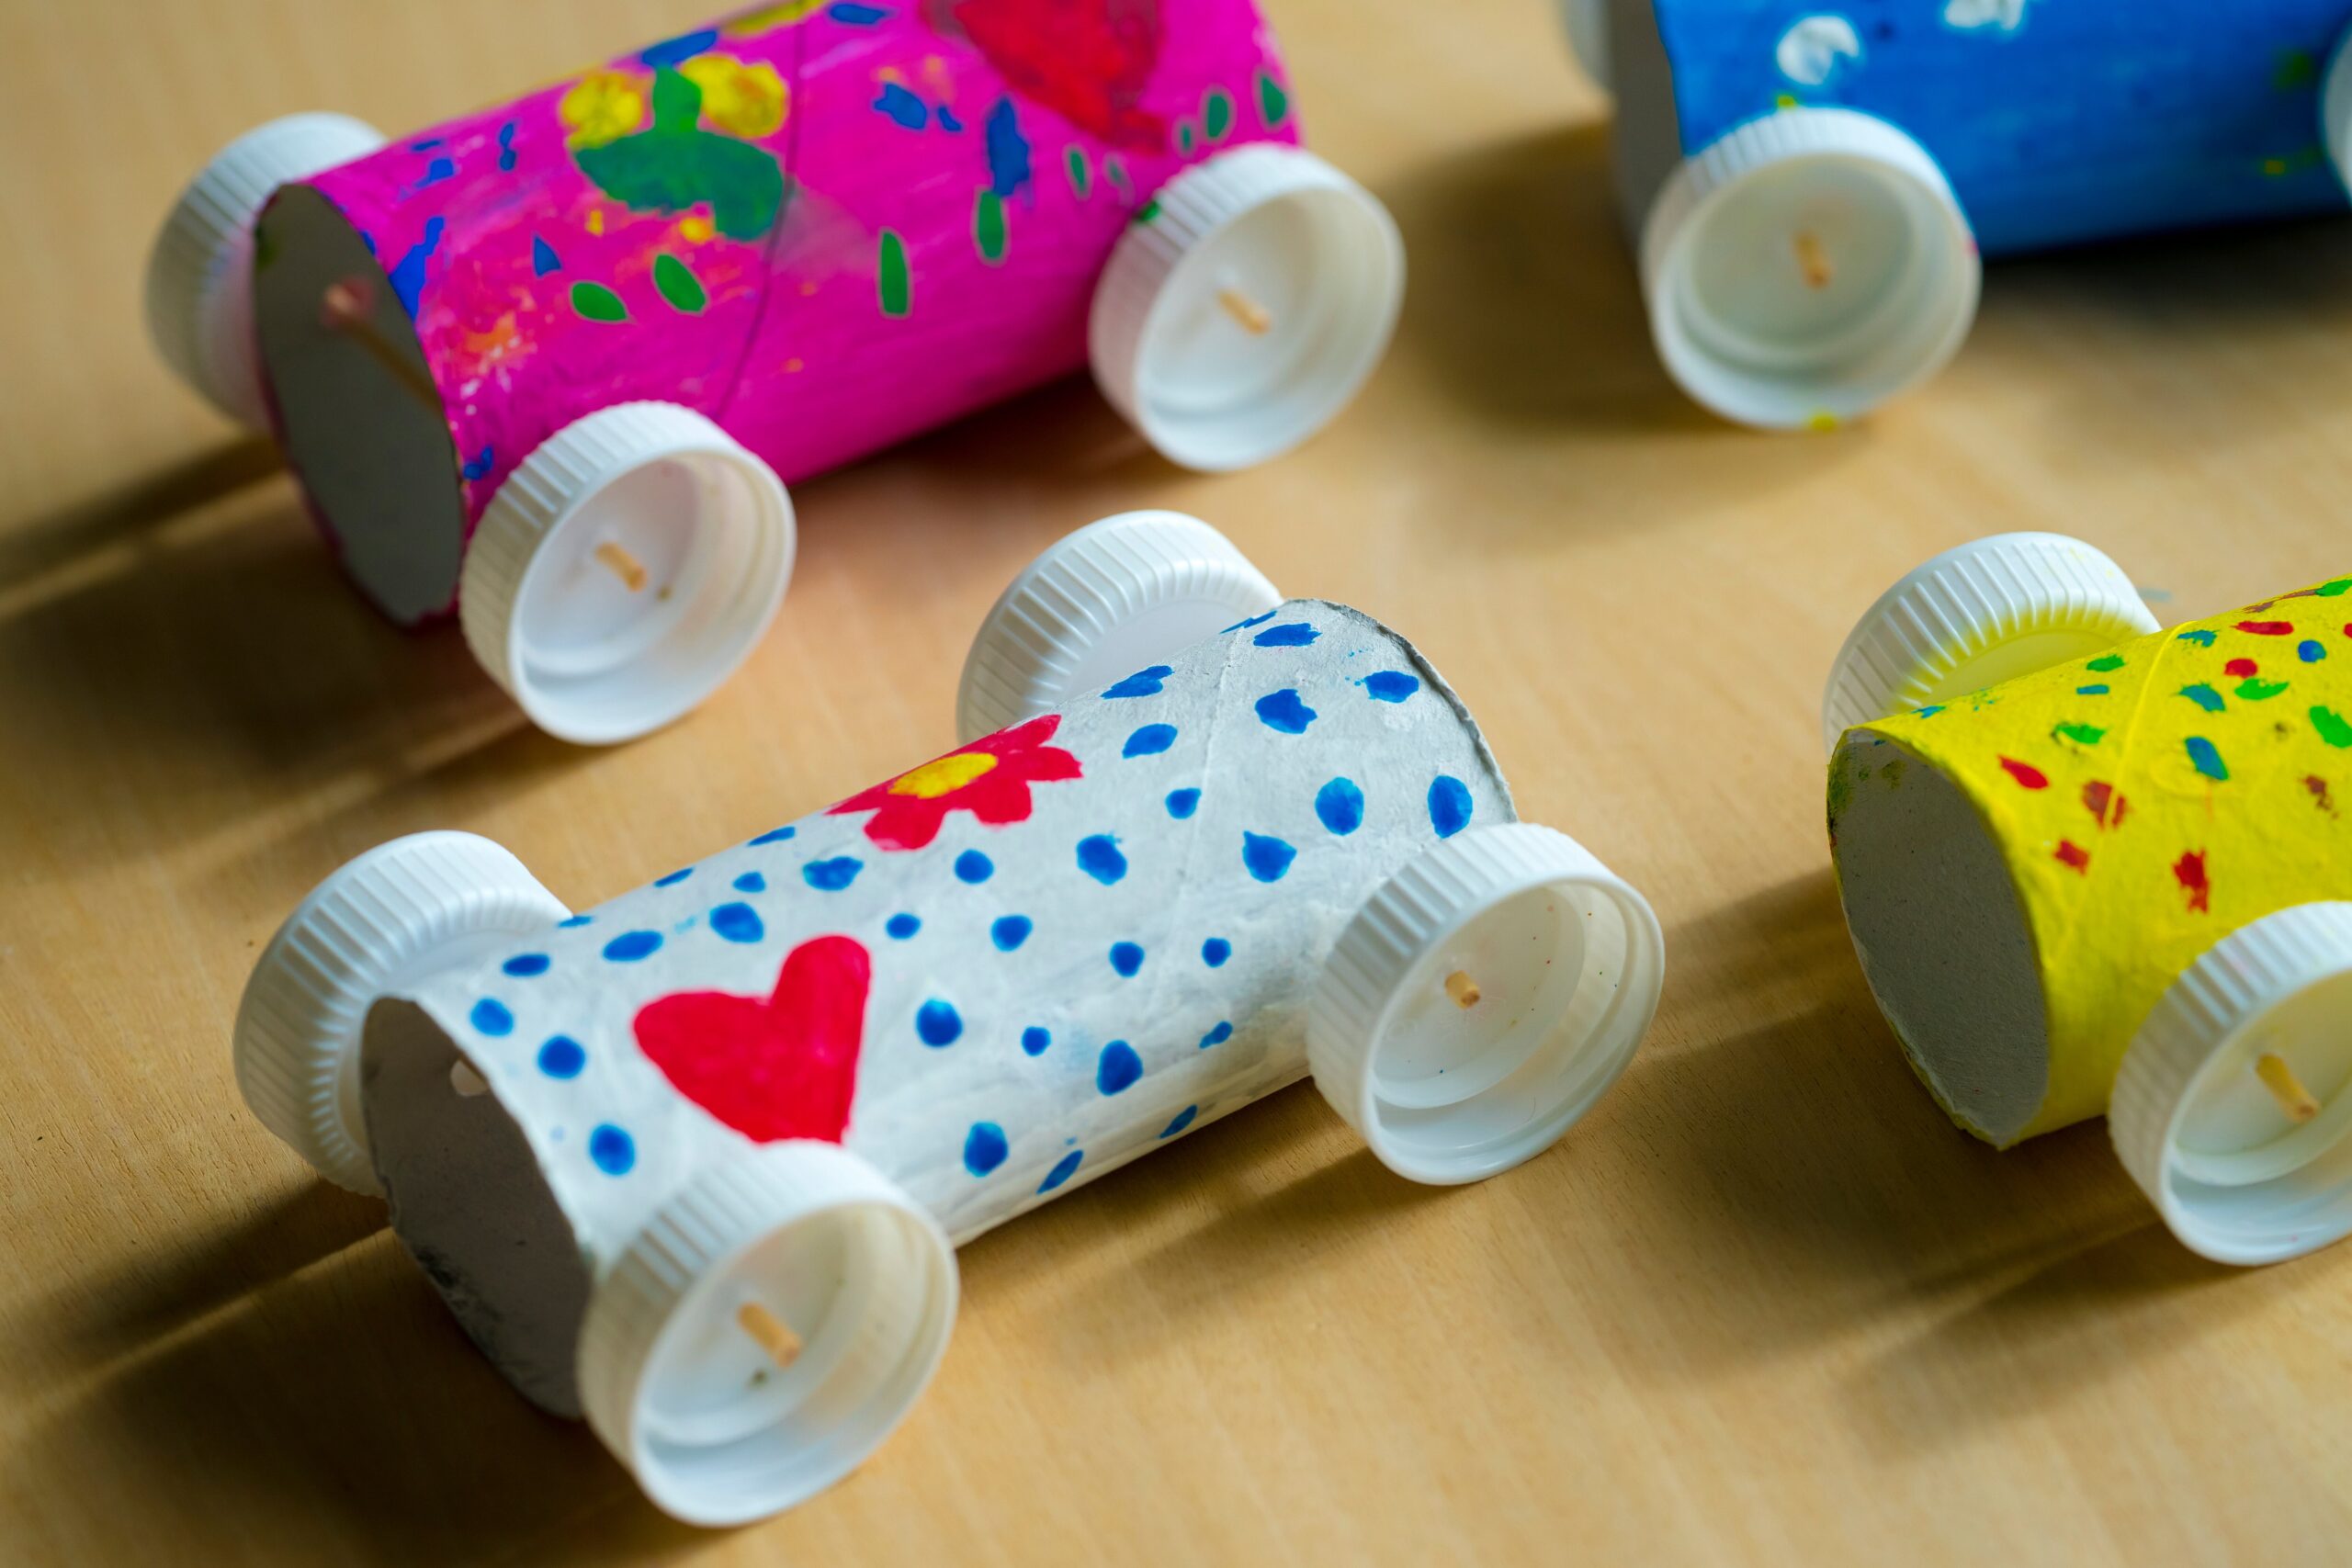 Most materials are recyclable, so why can't children's toys be